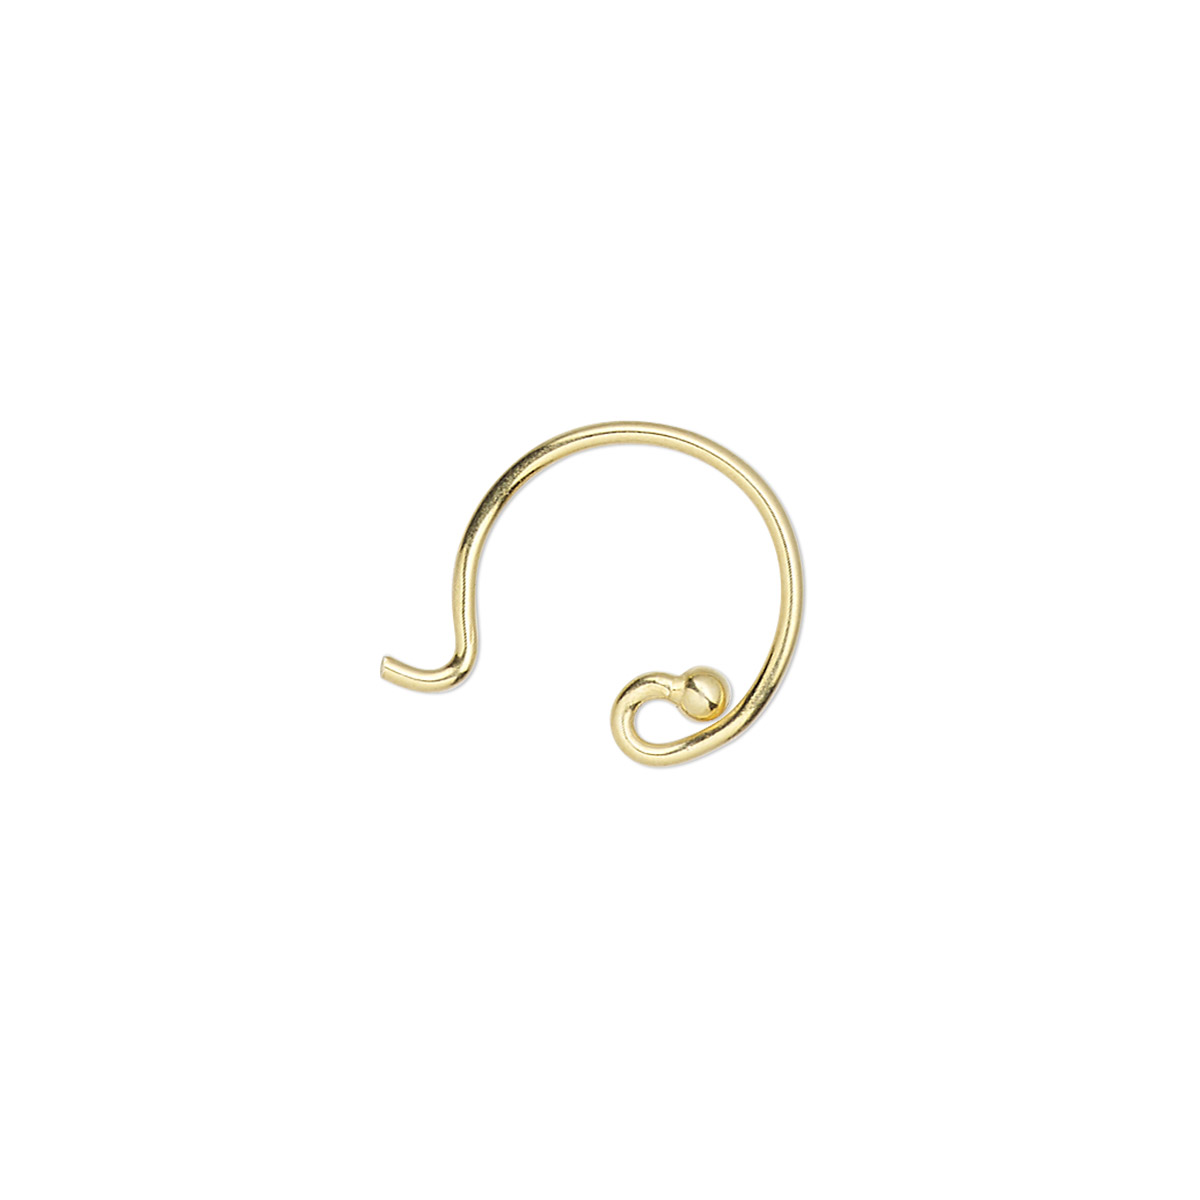 Ear wire, gold-finished sterling silver, 12mm French hook with 2mm ball ...